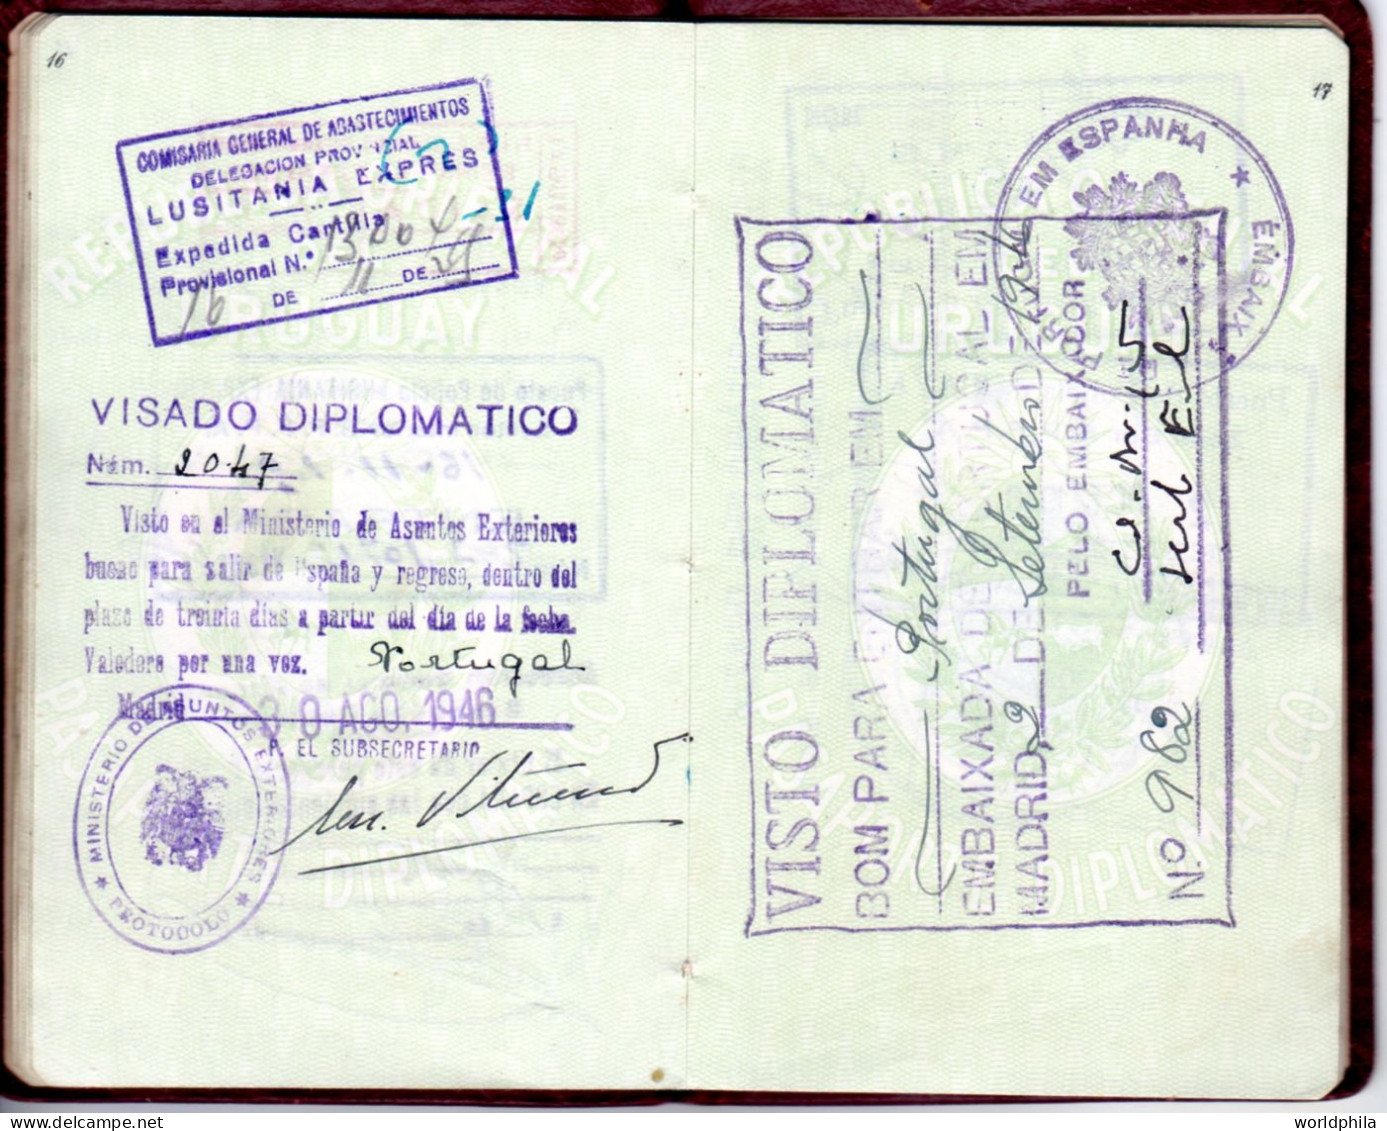 Uruguay End of WWII 1945-9 much travelled document, Europe & Latin America, signed Diplomatic Passport History document